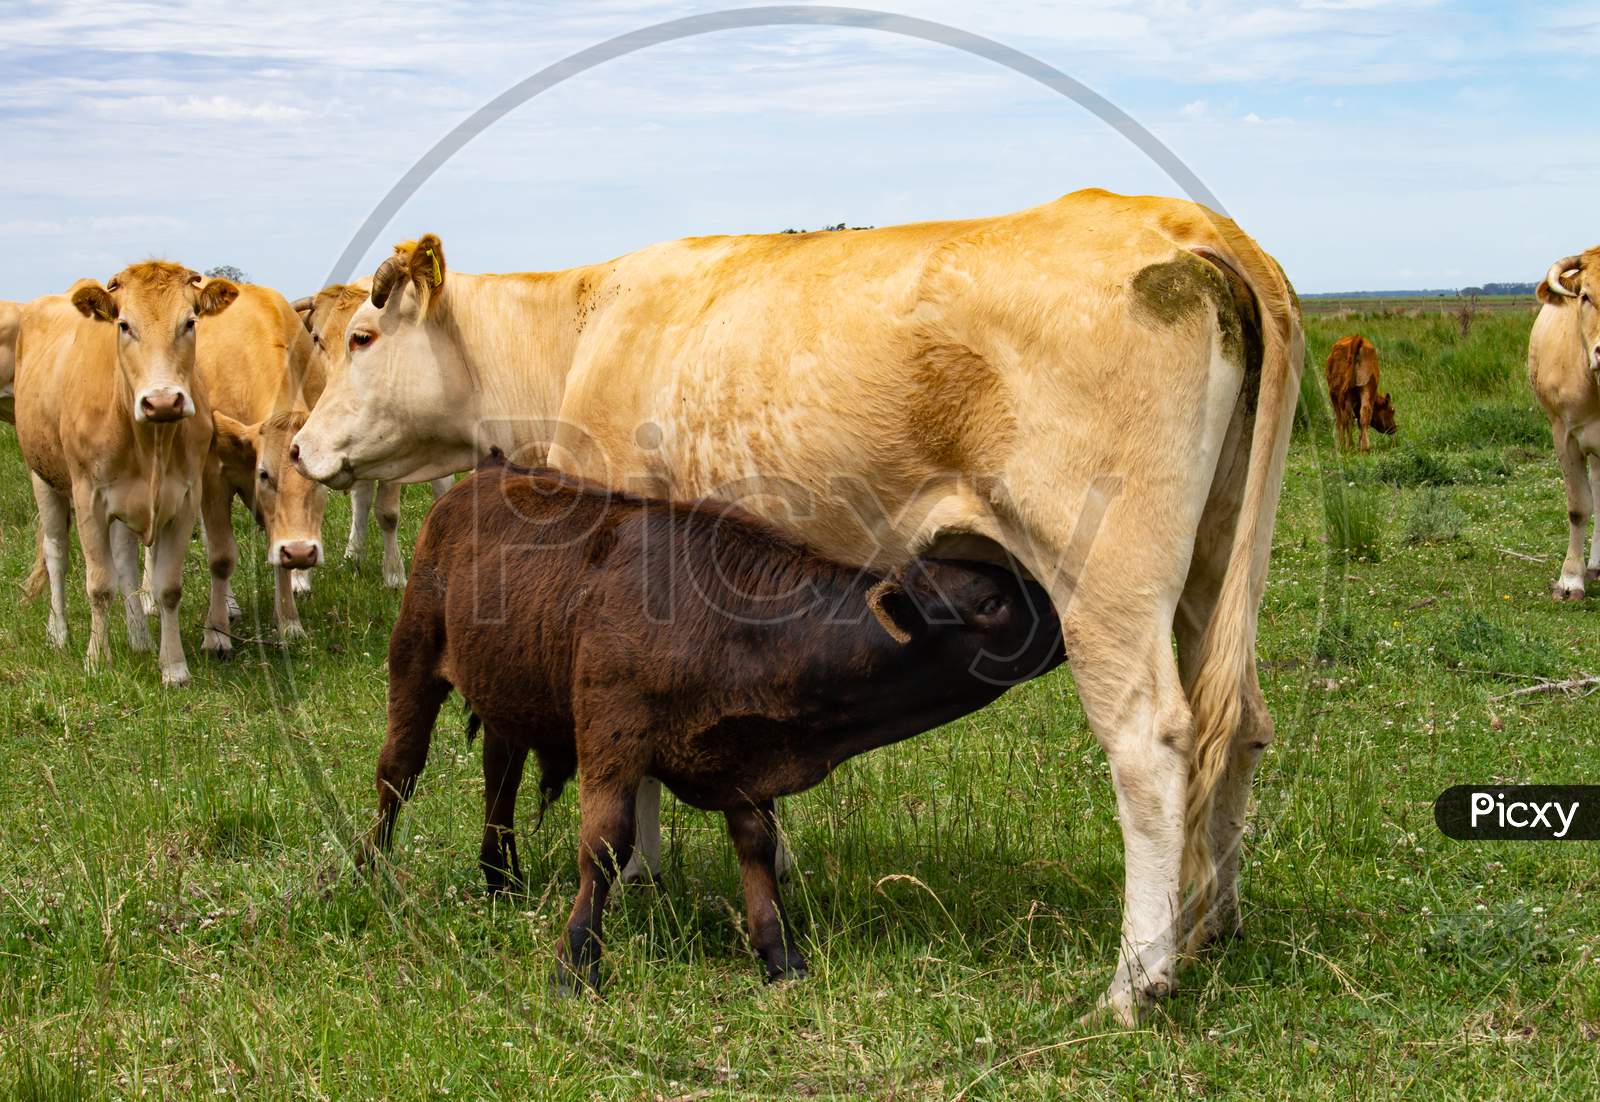 Beige Cow Of The Aquitaine Breed. Huge Four-Legged Animal For The Production Of Milk And Meat For Food.